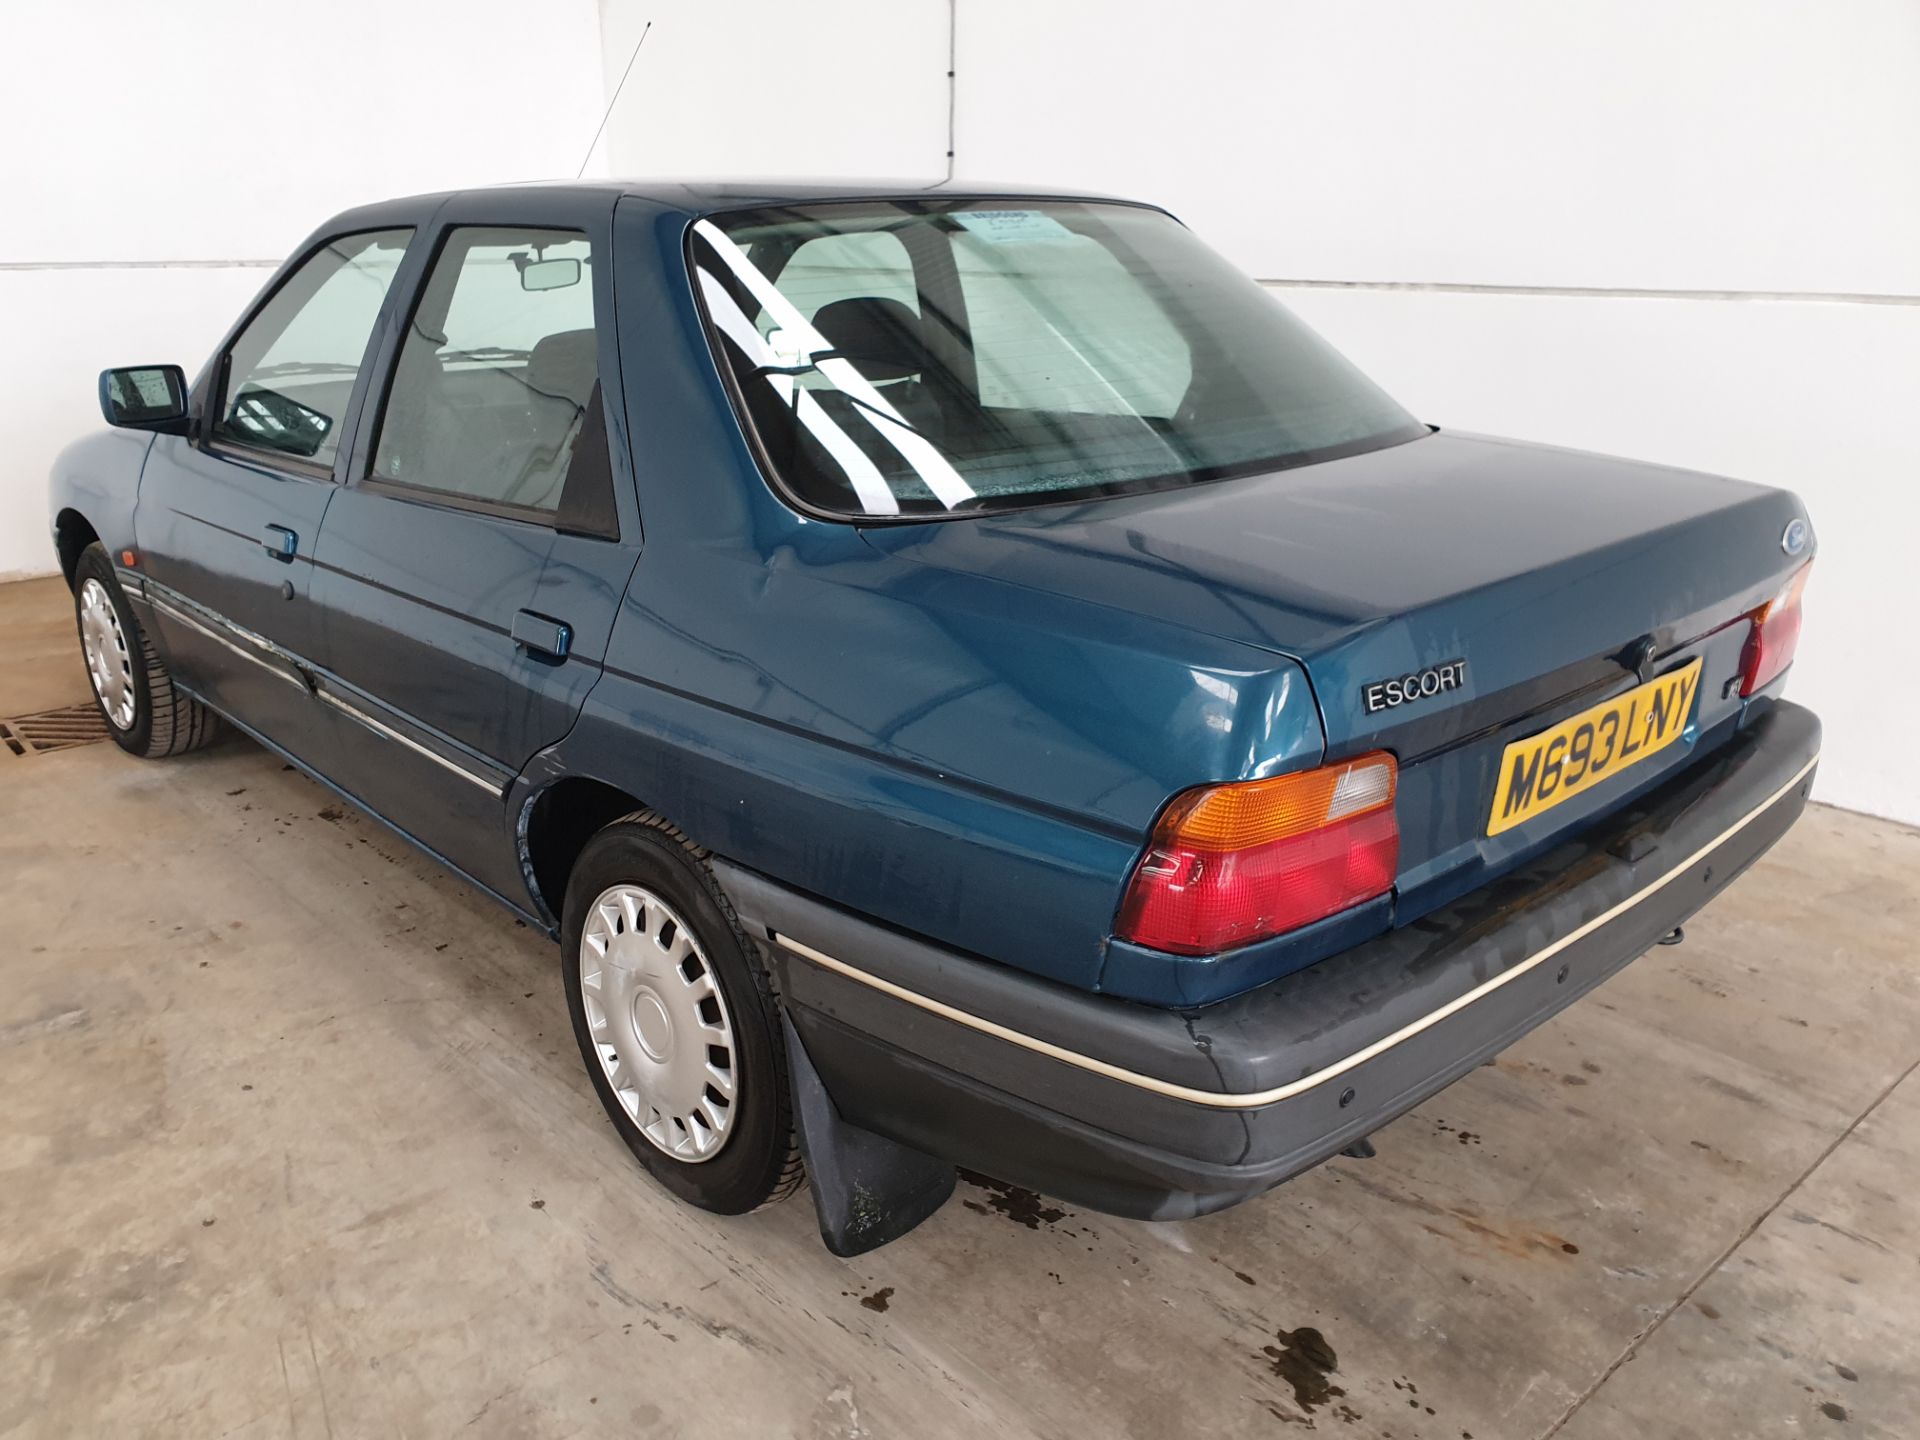 1995 / M Ford Escort LXi Saloon - Image 6 of 8